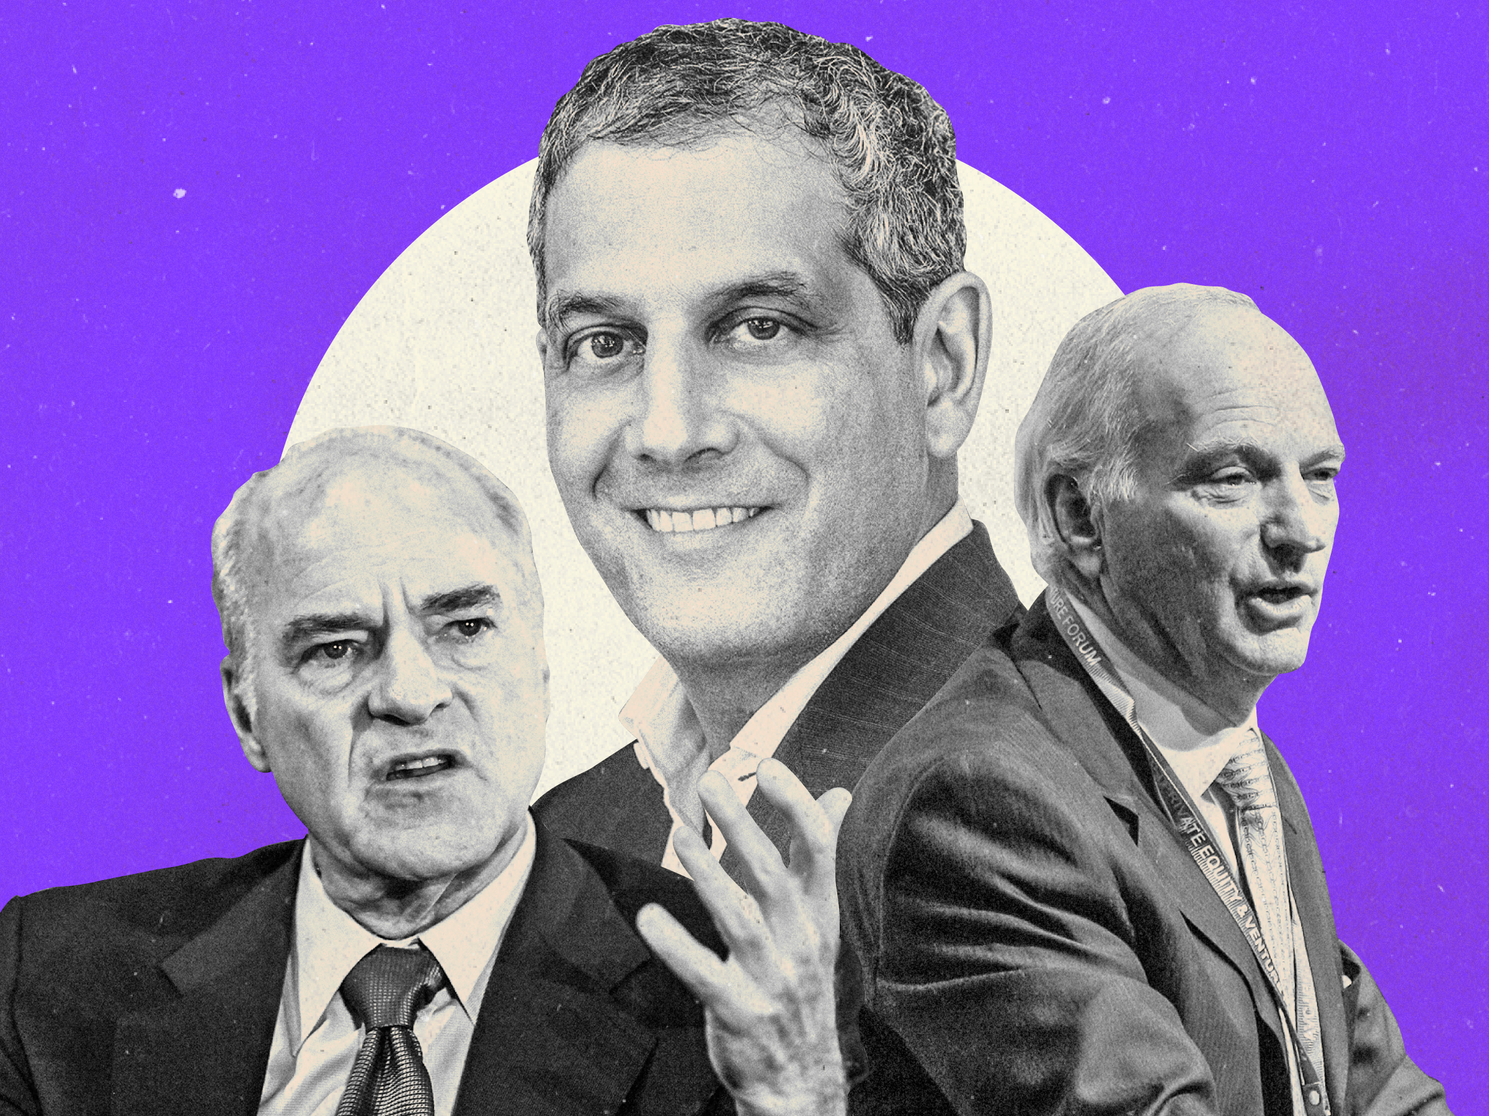 Jim Momtazee, Henry Kravis, and George Roberts on a bright purple background.